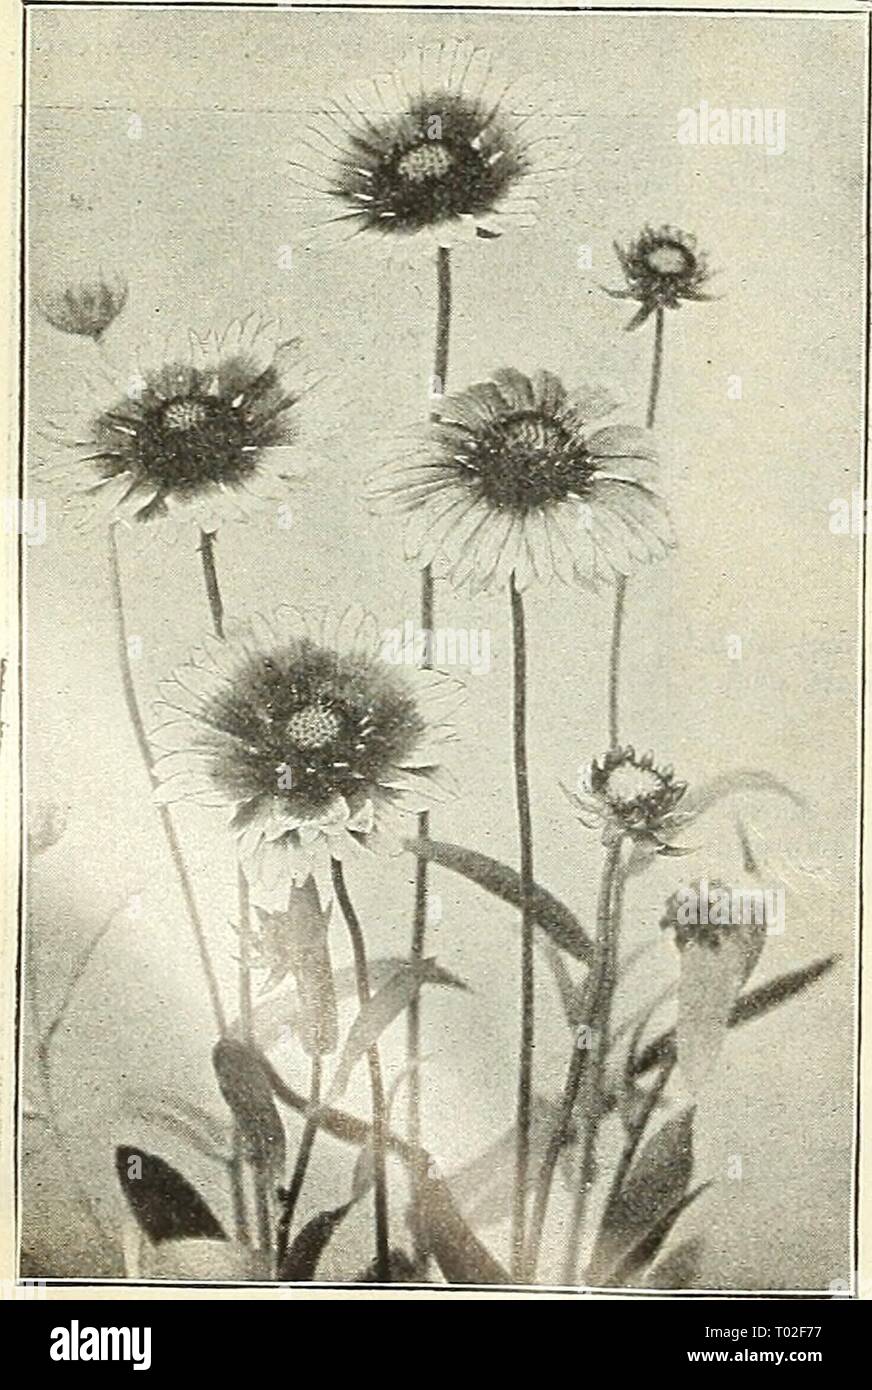 Dreer's garden calendar : 1903 . dreersgardencale1903henr Year: 1903  Euphorbia Corollata.    Gaillardia Grandiflora. GALEGA (Goat's Rue). Officinalis. A useful border plant, producing showy racemes of rosy-purple flowers in great profusion during July and Aug- ust: height, 2 feet. Officinalis Alba. A white- flowered form of the above. 15 cts. each; §1.50 per doz. GAILLARDIA. Grandiflora. One of the show- iest and most effective hardy plants; beginning to flower in June, they continue one mass of bloom the entire season ; they will thrive in almost any soil or position, but respond freely to l Stock Photo